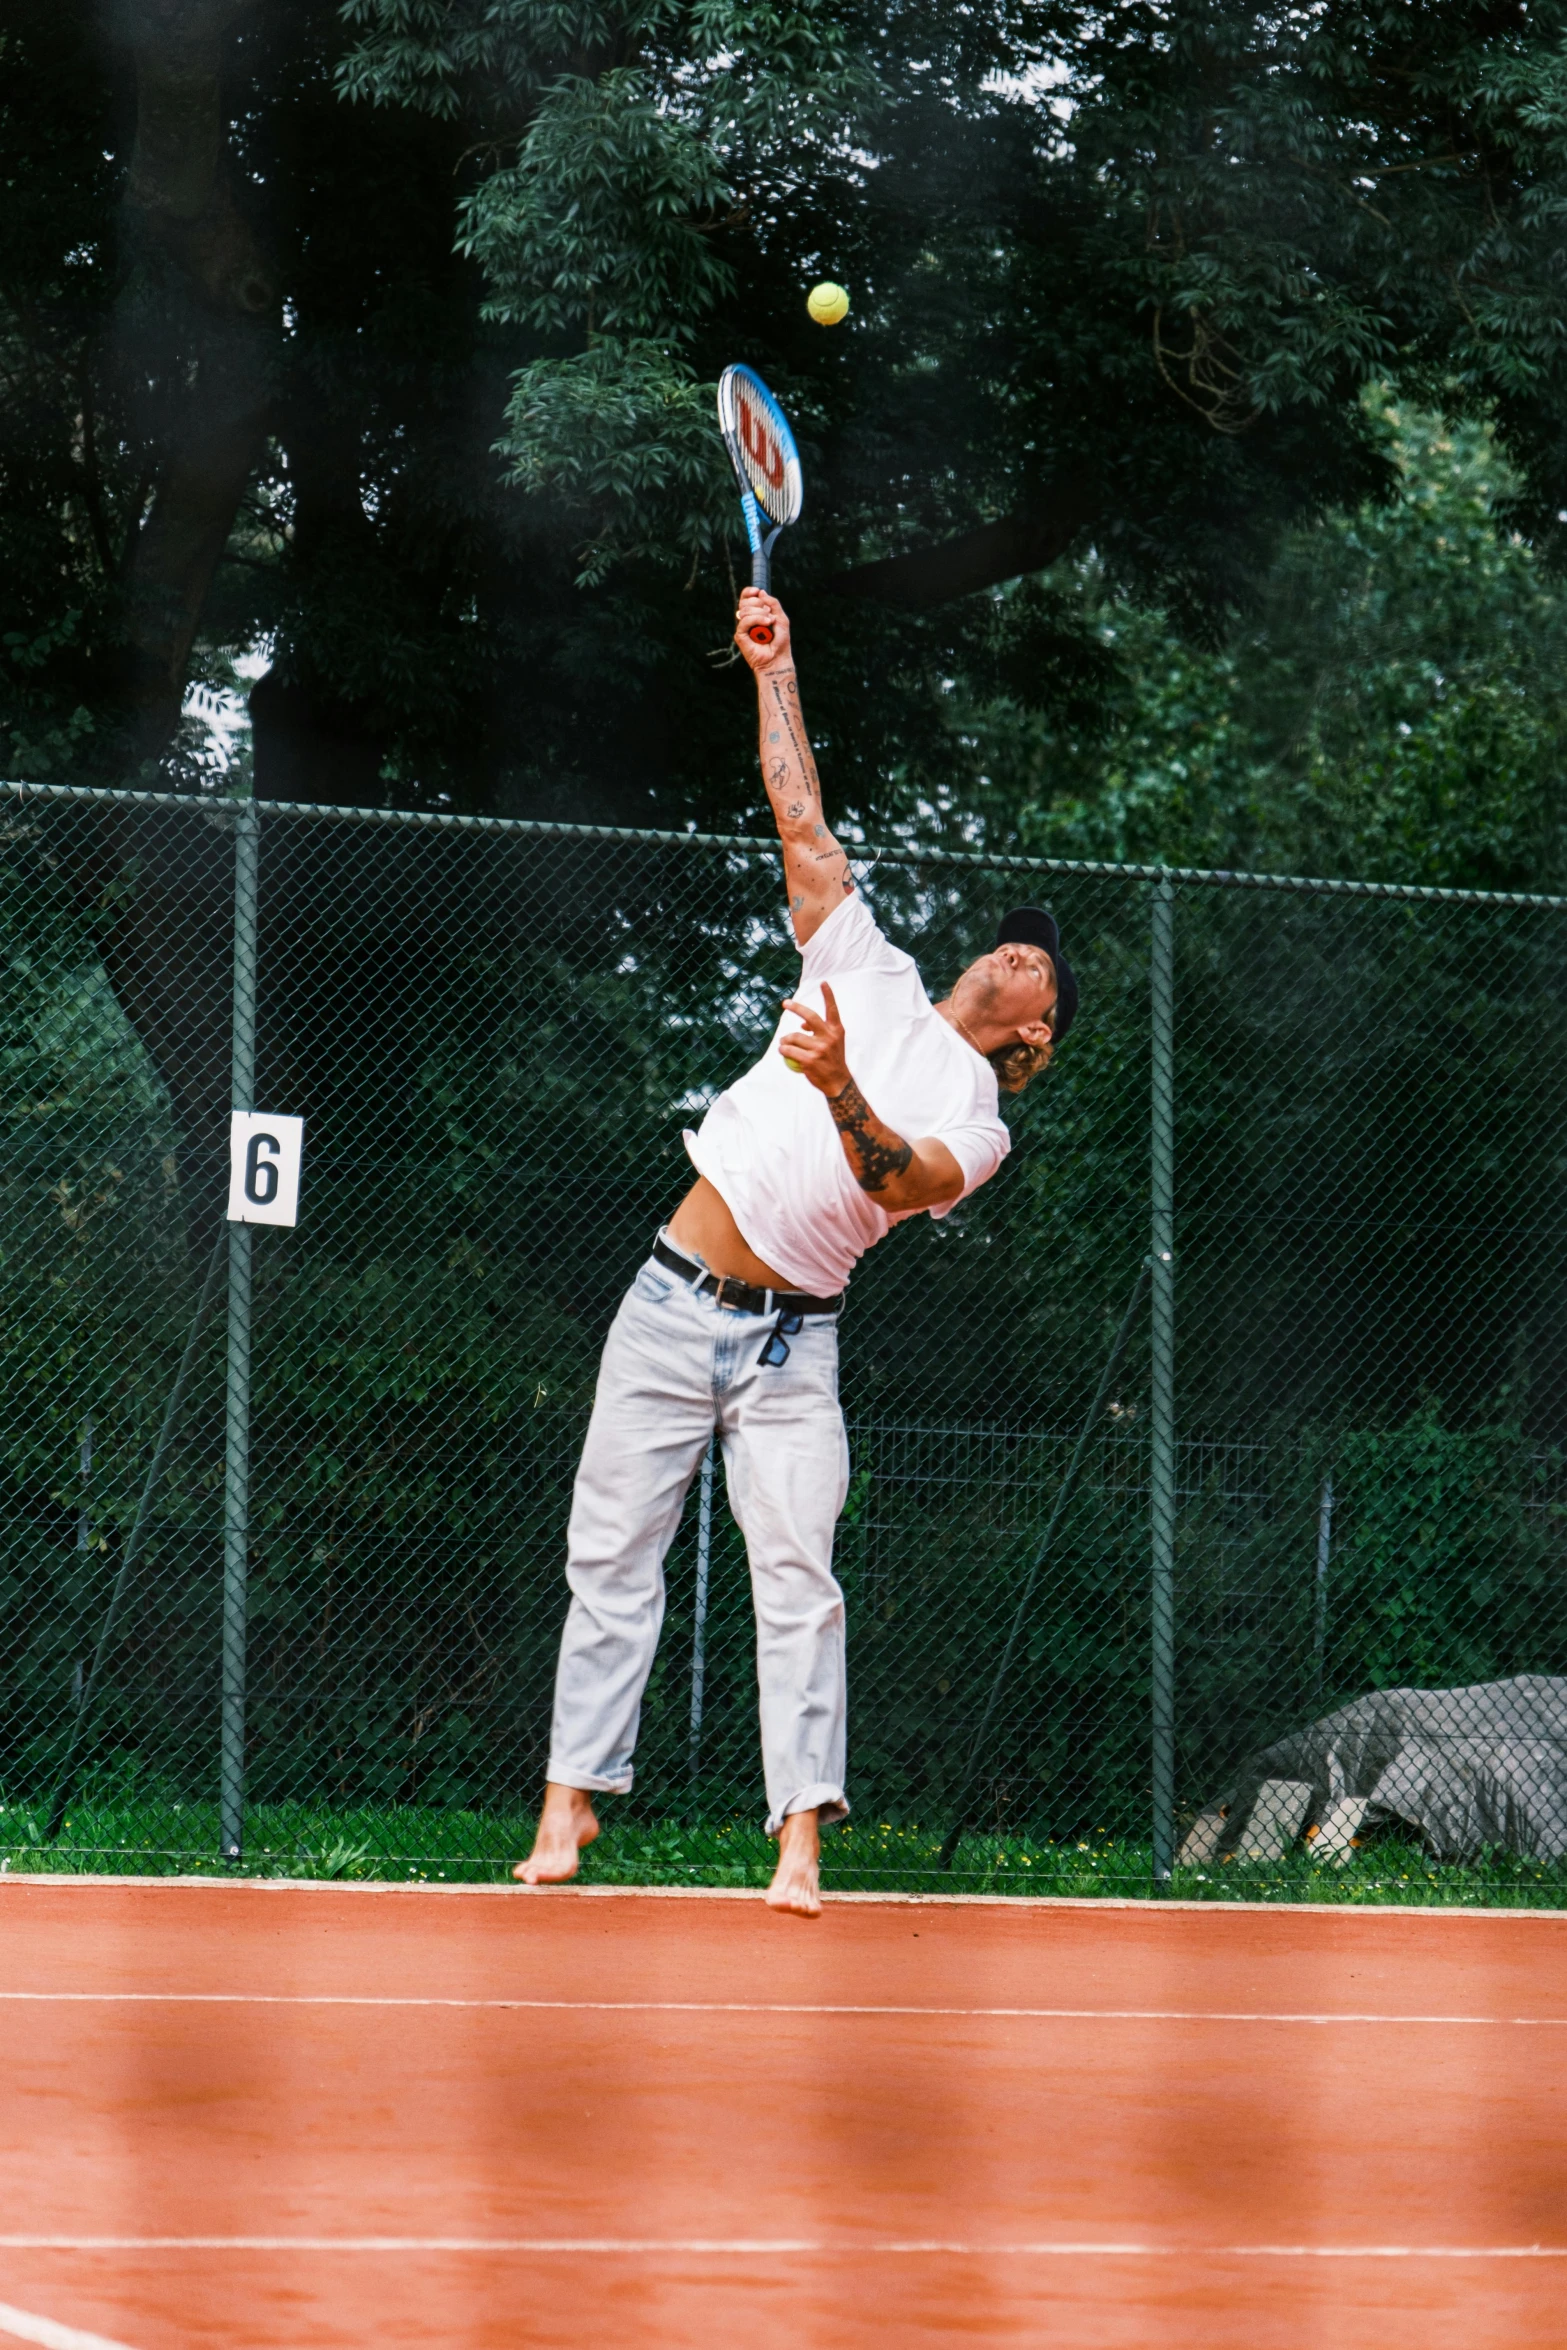 a man is holding a tennis racket preparing to swing it